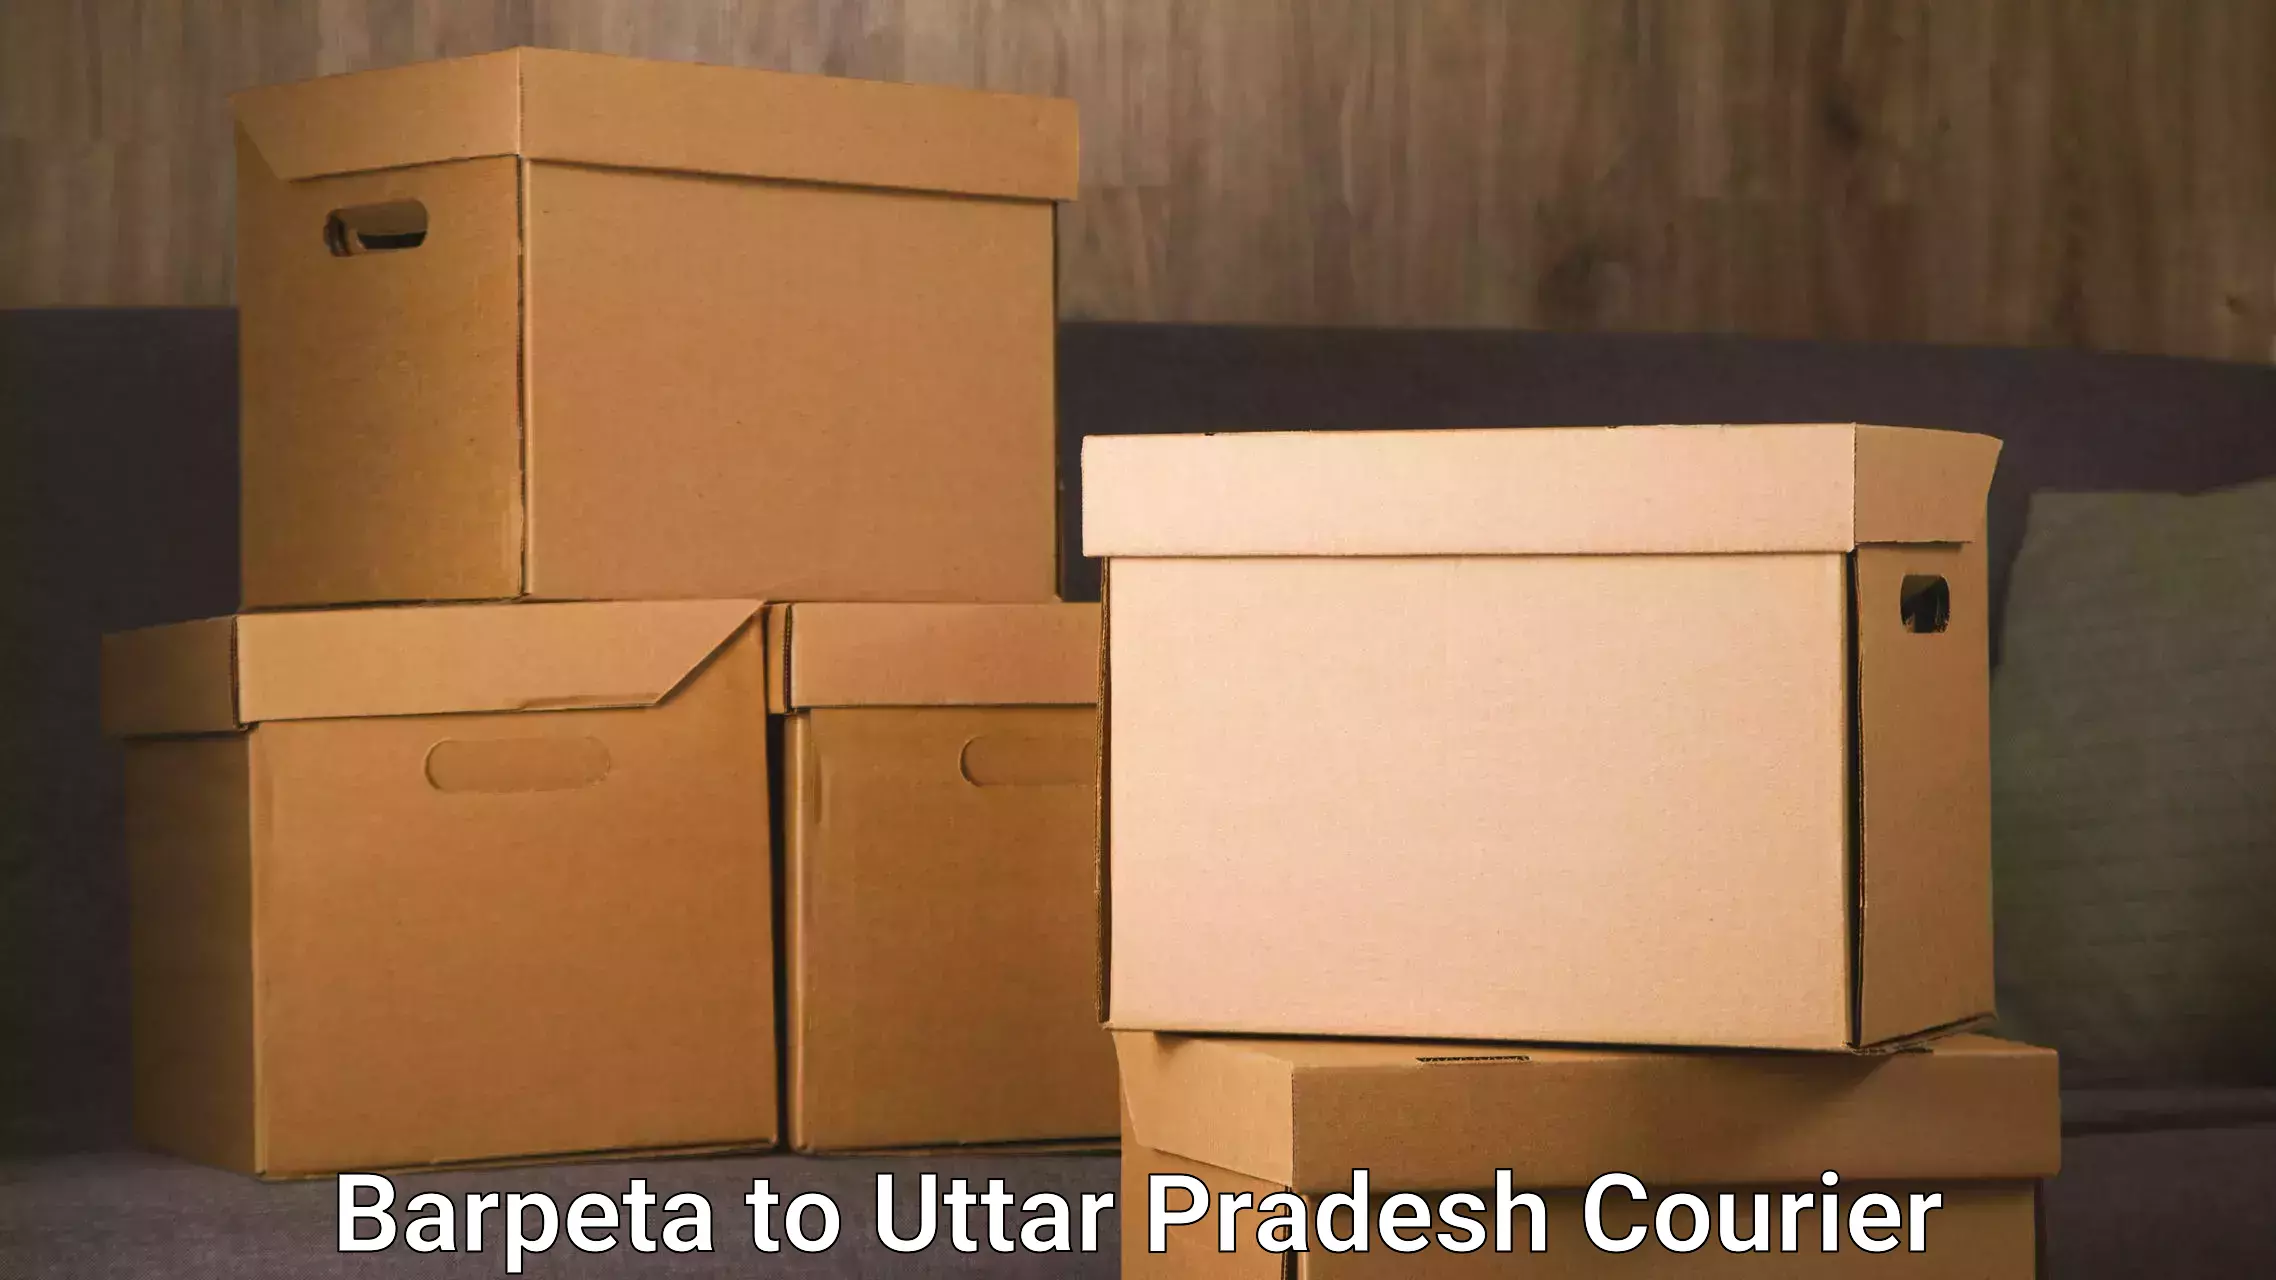 On-call courier service Barpeta to Agra